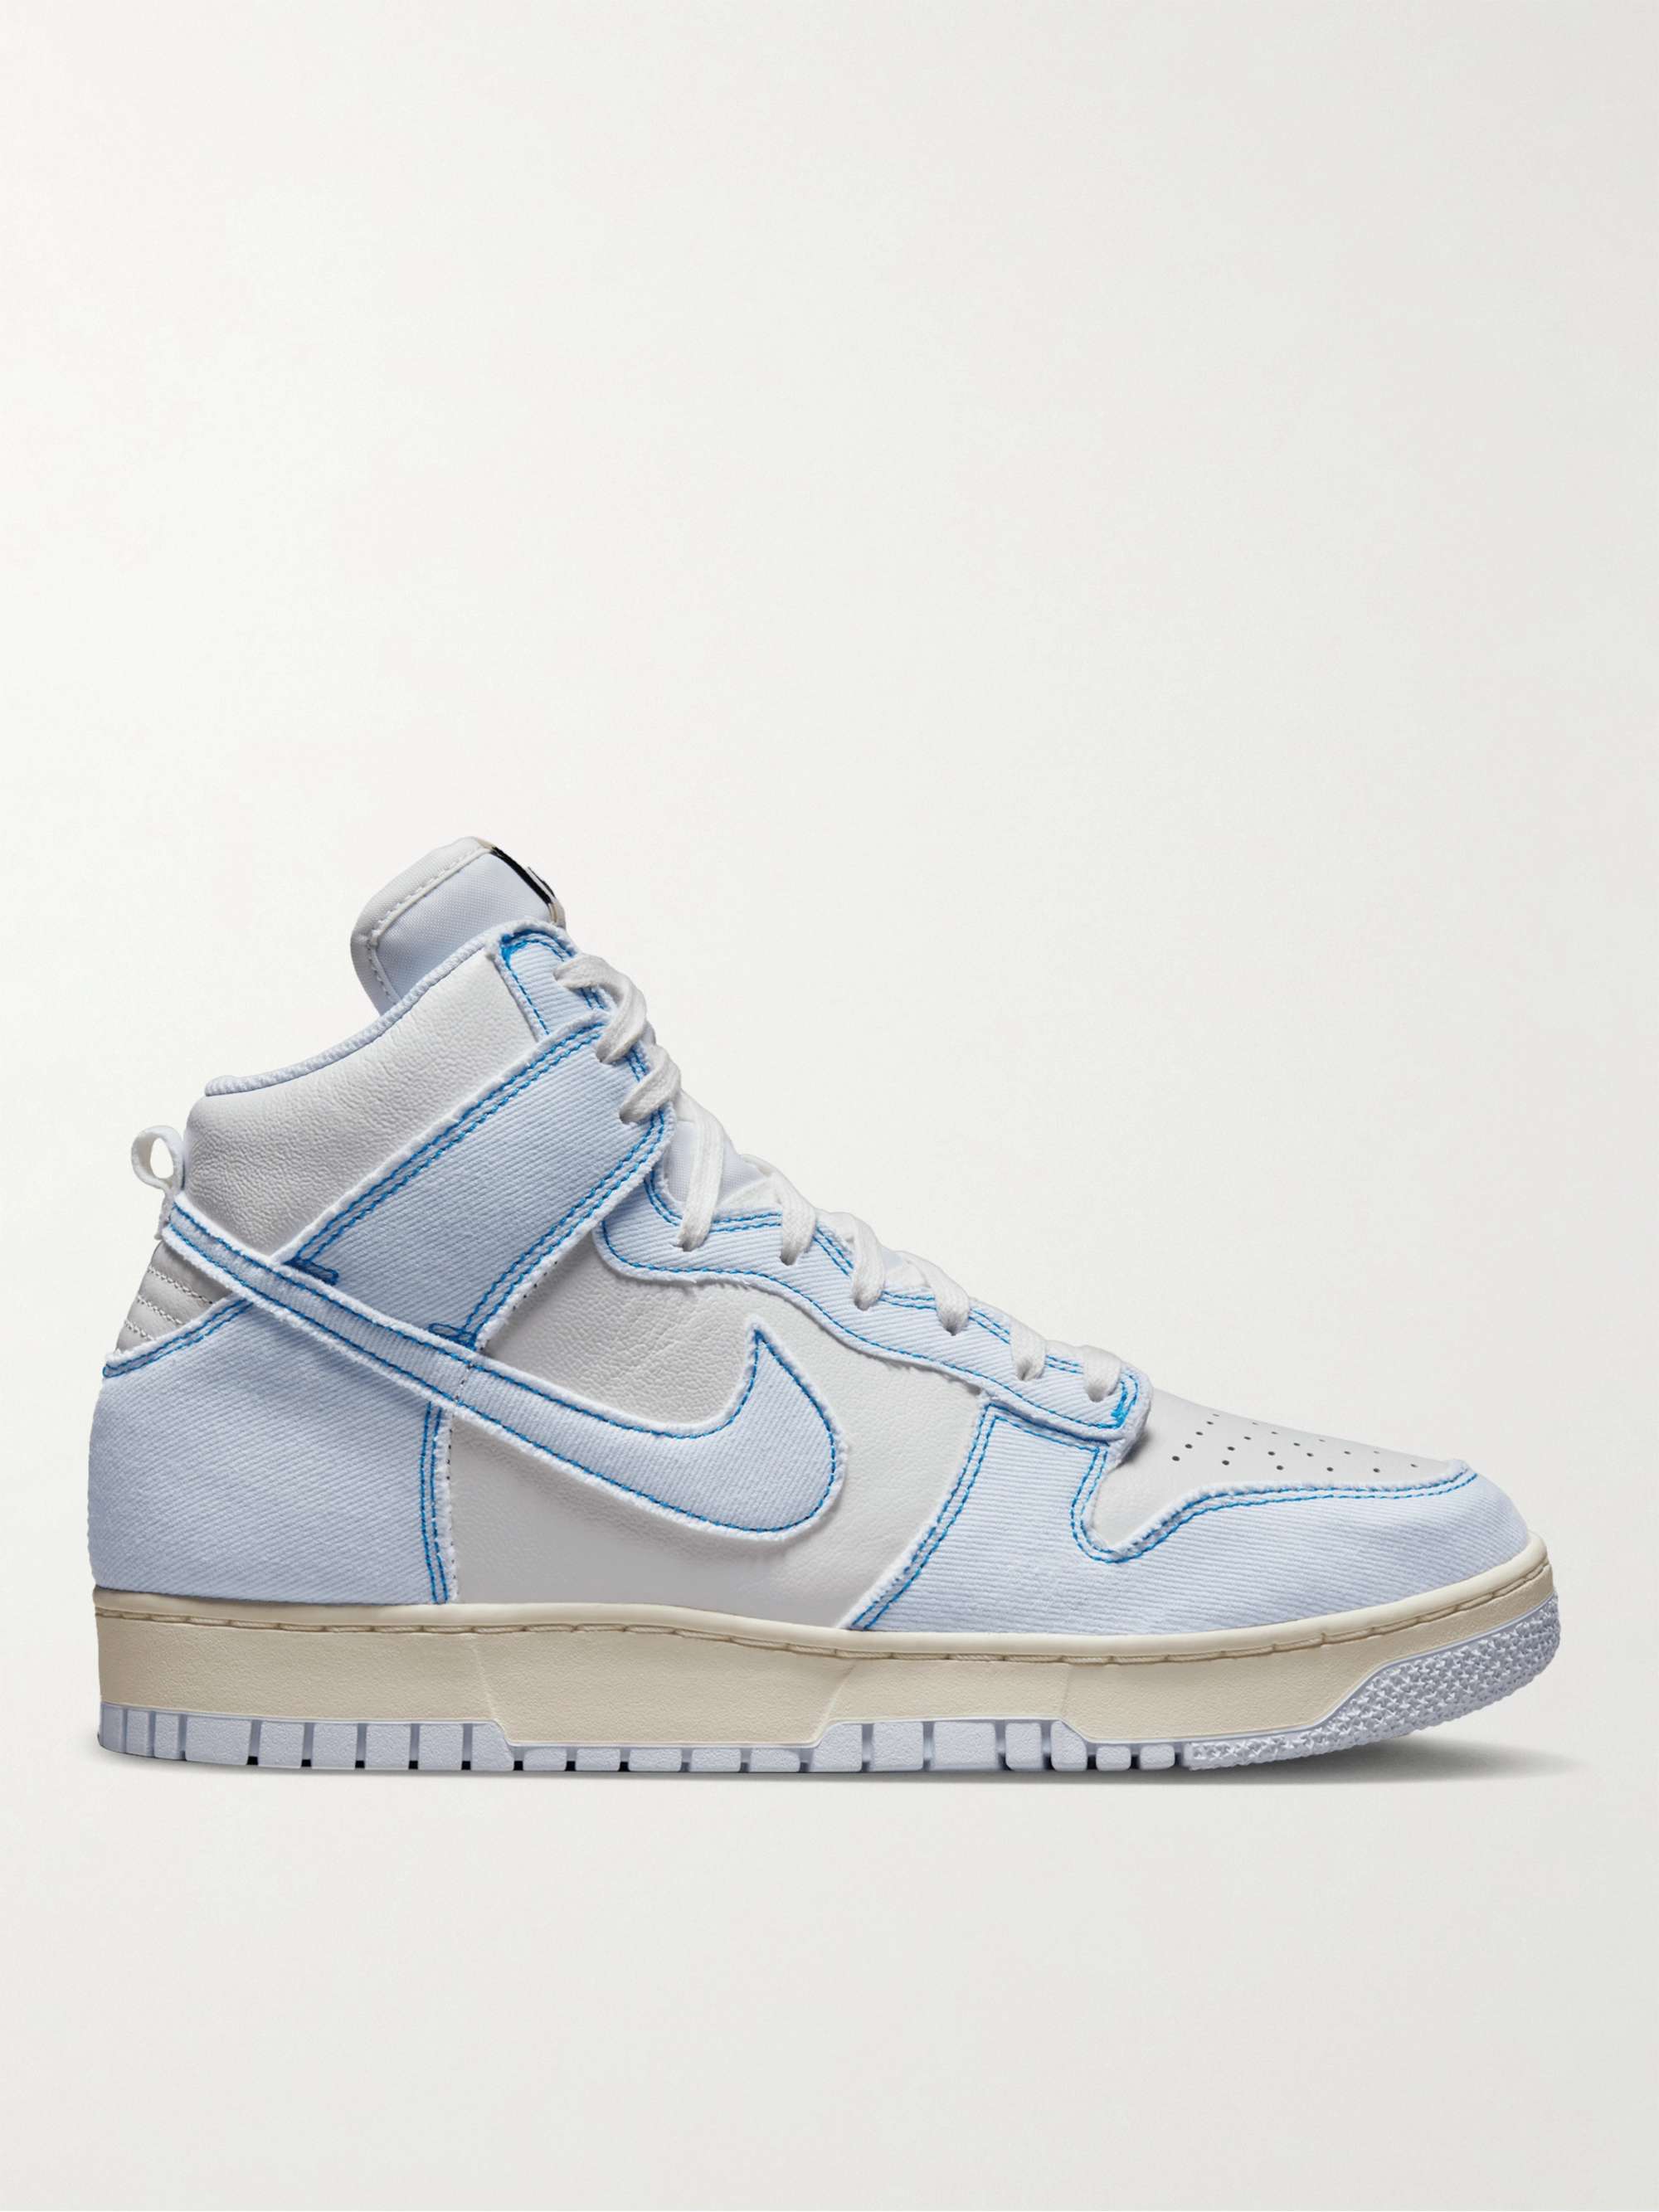 White Dunk Hi 1985 Leather and Denim Sneakers | NIKE | MR PORTER